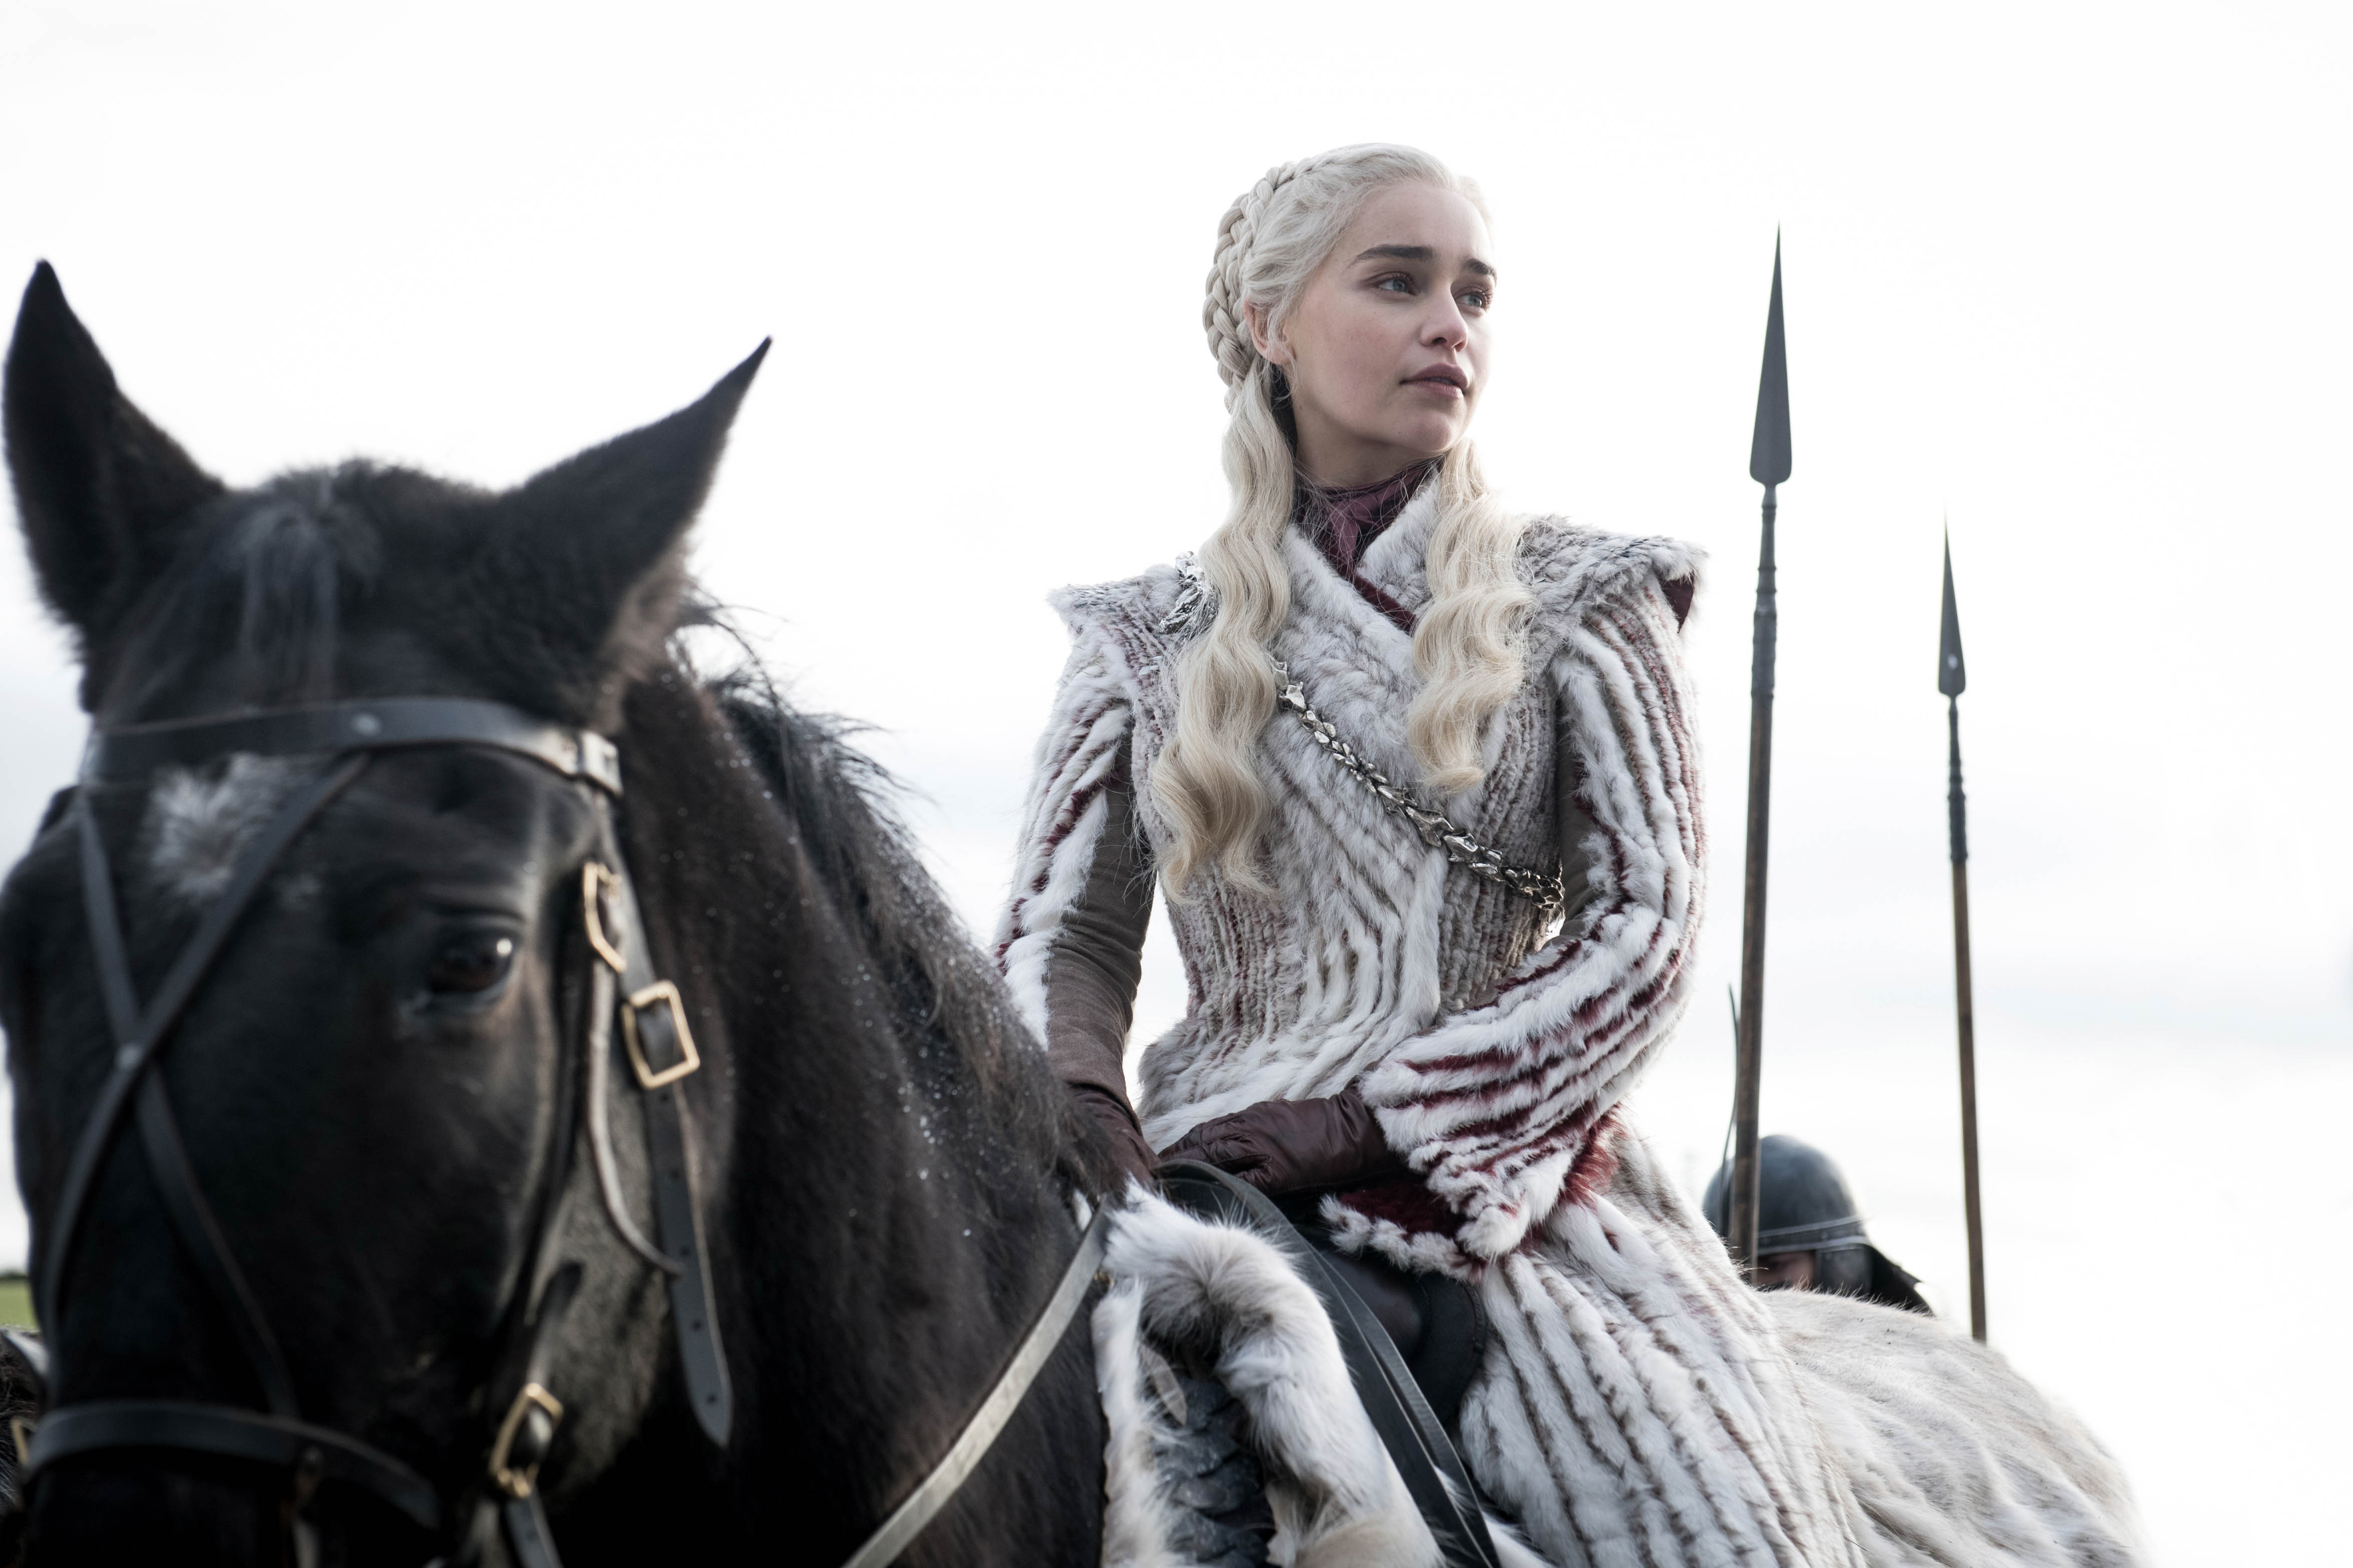 Daenerys Targaryen seated on a horse in the HBO show “Game of Thrones.”